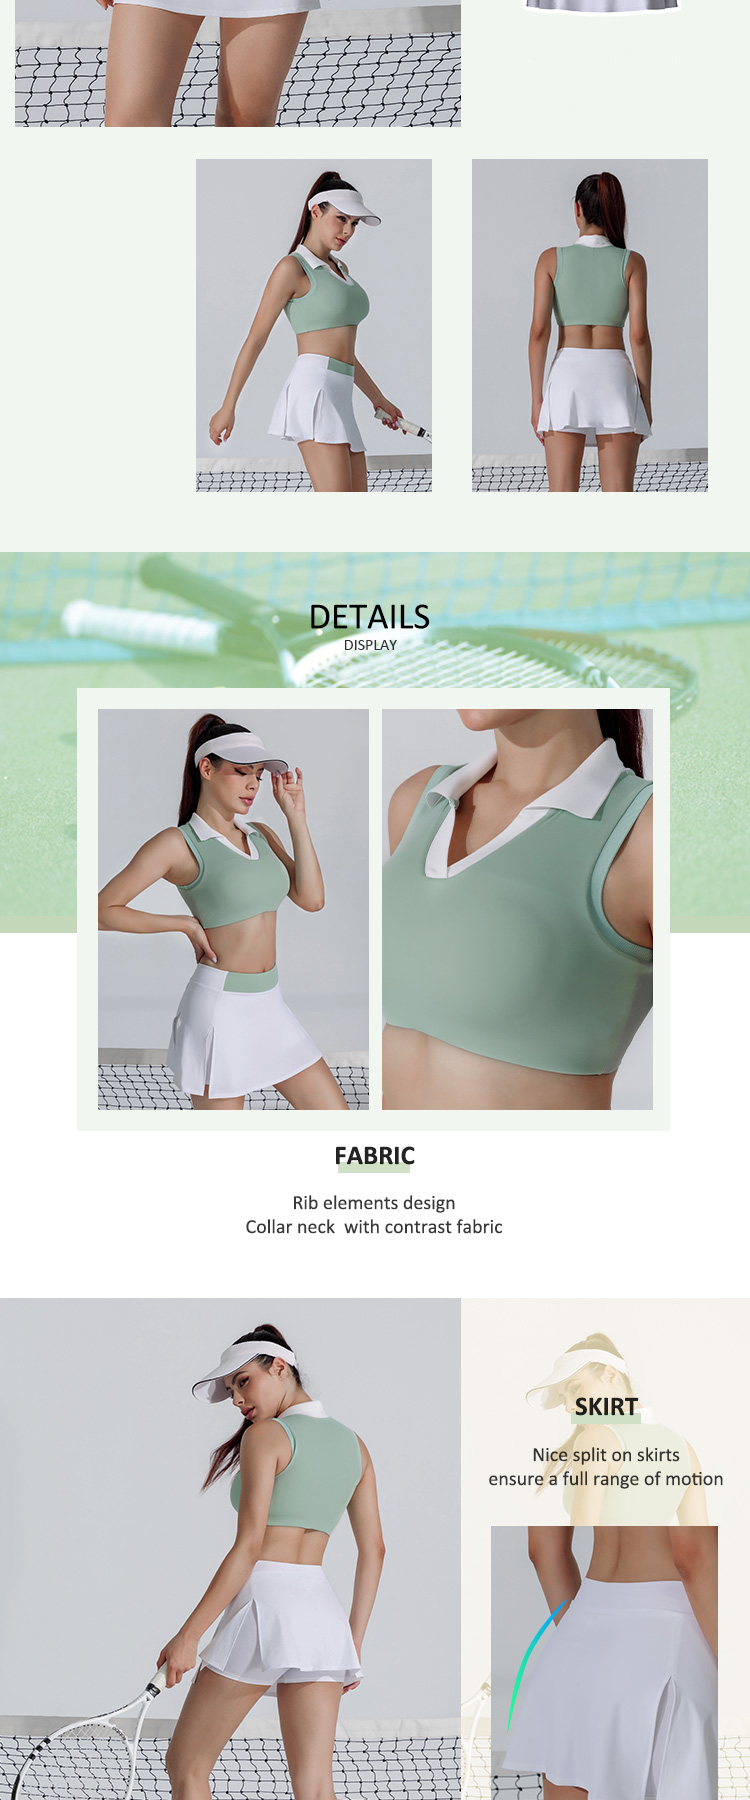 INGOR tennis clothes woman supplier for girls-3